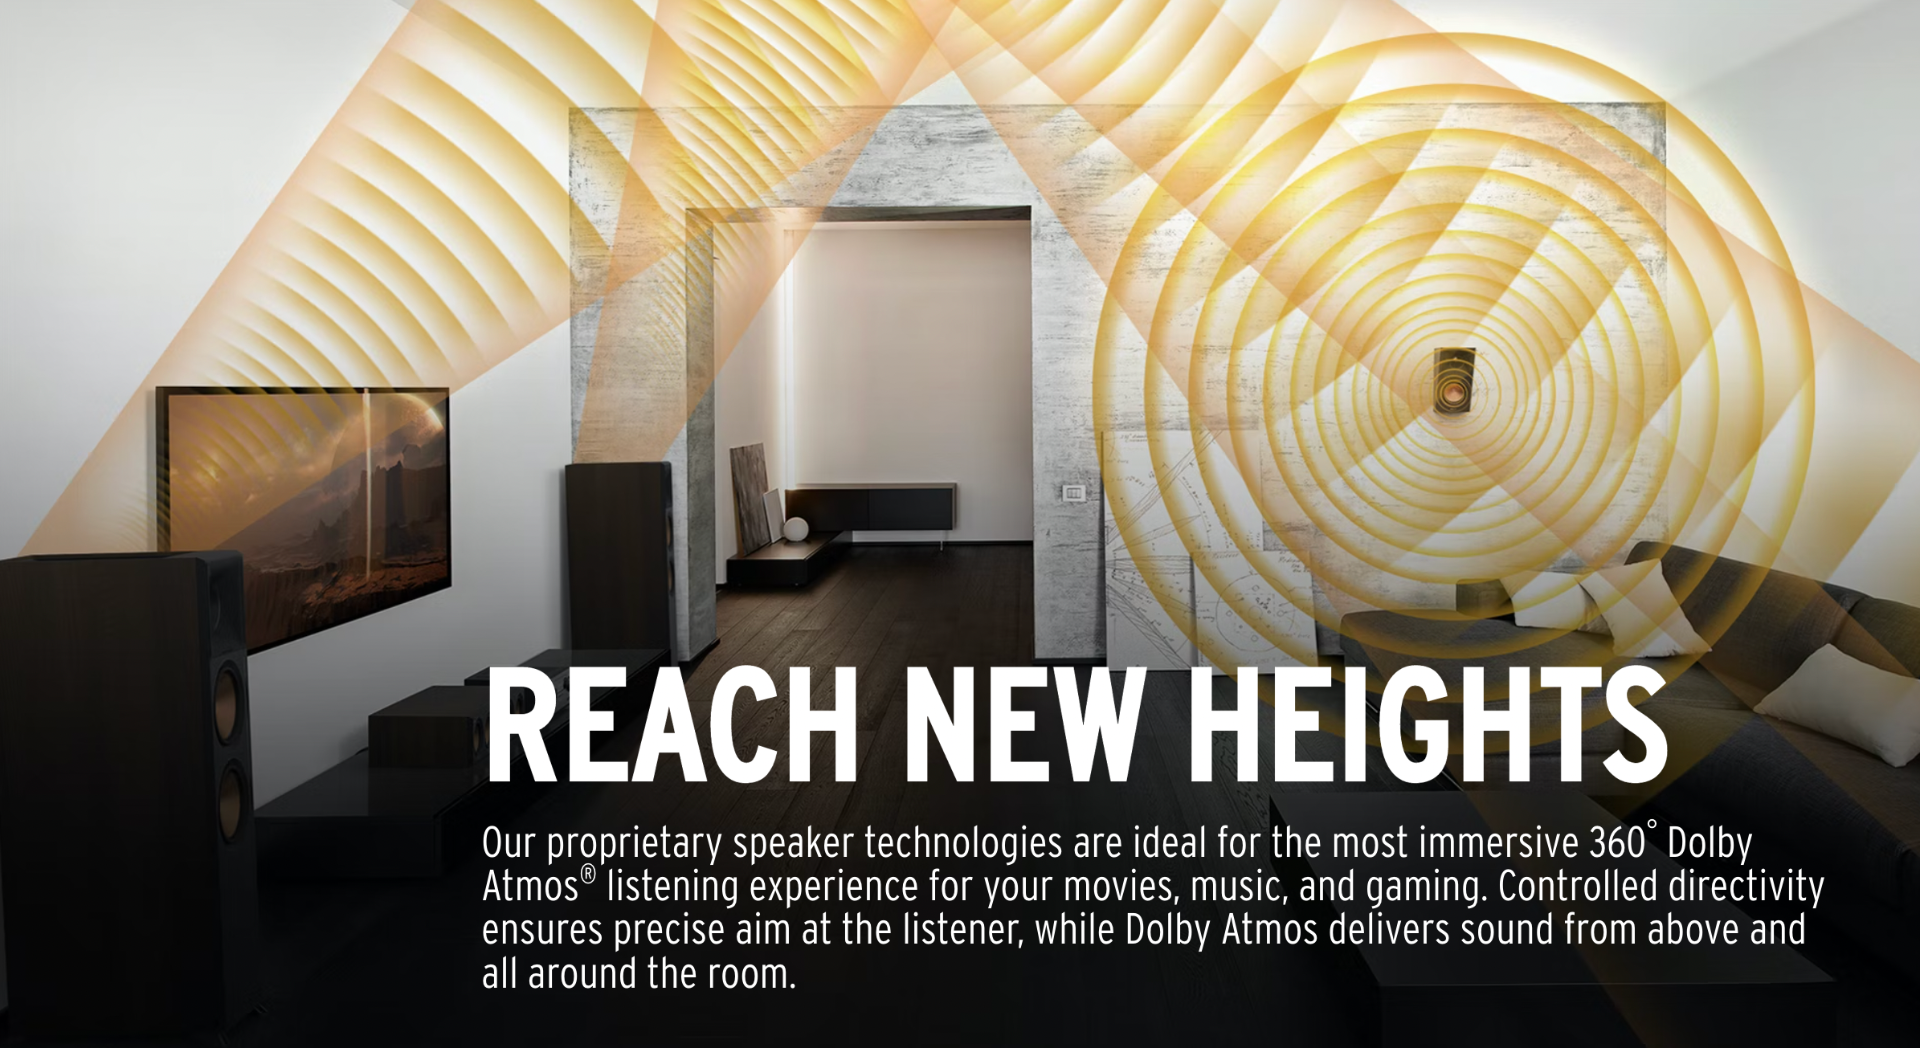 Our proprietary speaker technologies are ideal for the most immersive 360° Dolby Atmos listening experience for your movies, music, and gaming. Controlled directivity ensures precise aim at the listener, while Dolby Atmos delivers sound from above and all around the room. 